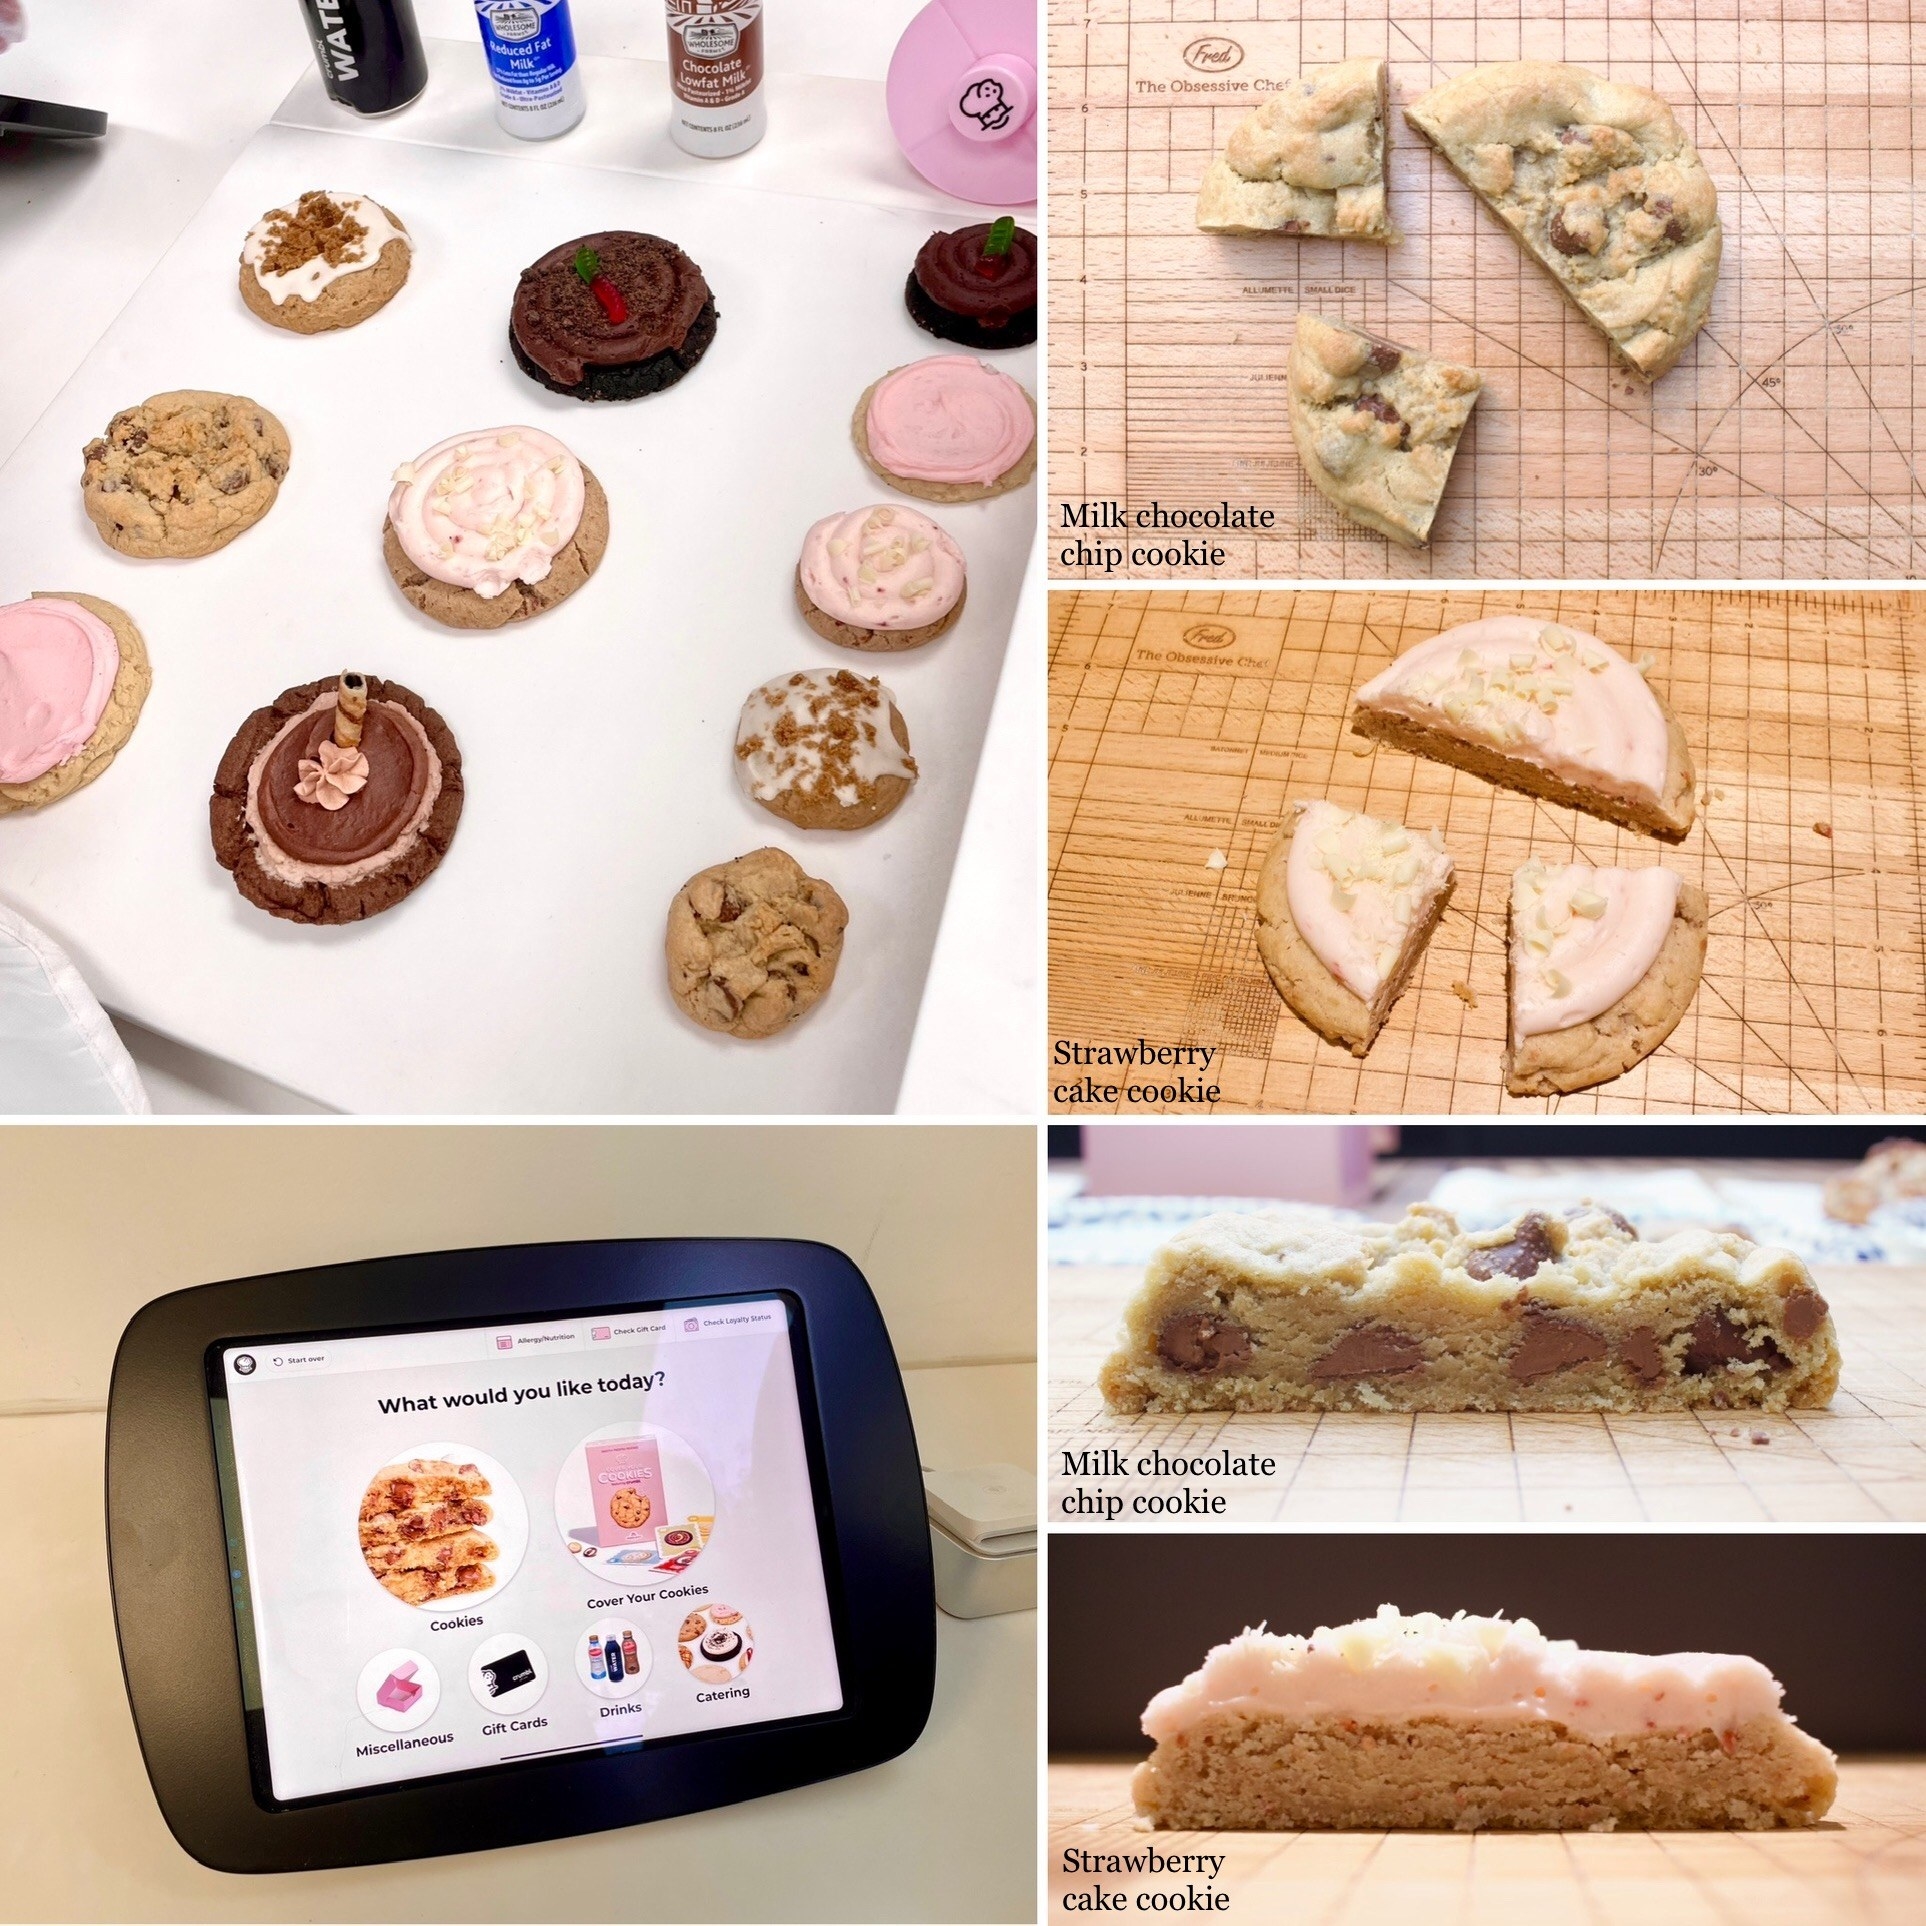 Clockwise from top left: display of 11 cookies; chocolate chip cookie; frosted strawberry cookie; cross section of chocolate chip cookie; cross section of frosted strawberry cookie; tablet saying &quot;what would you like today?&quot;